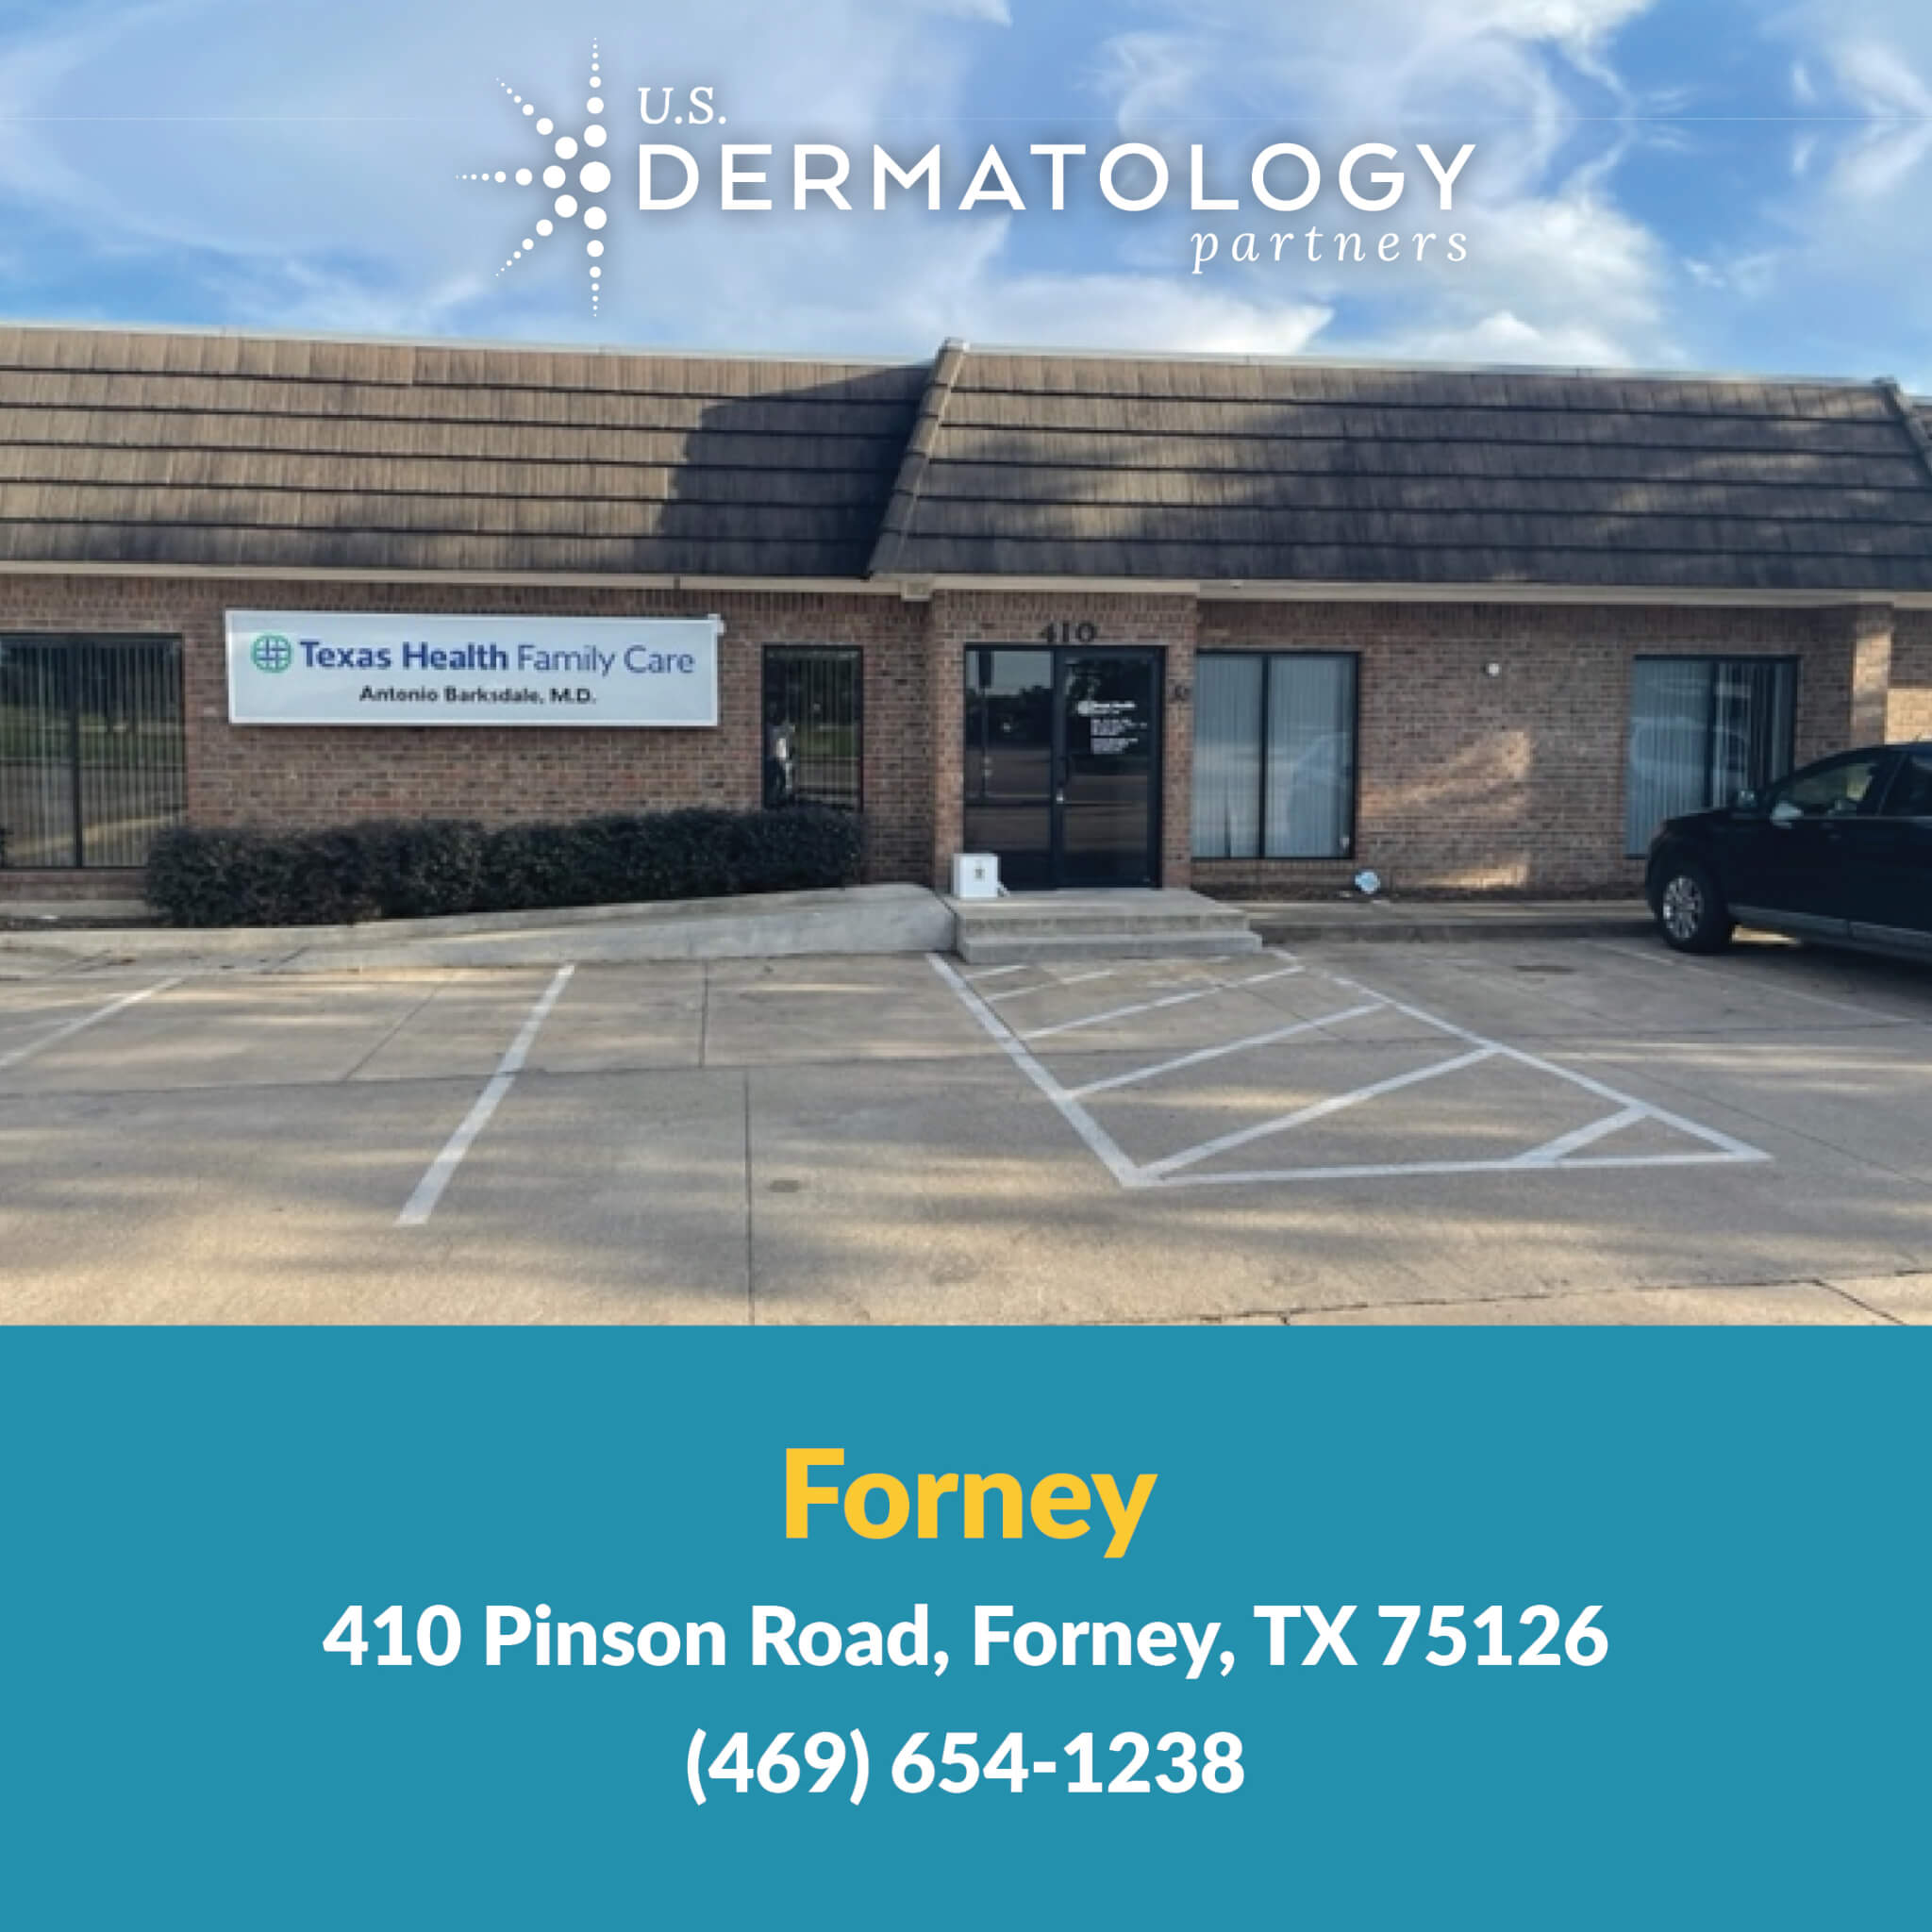 U.S. Dermatology Partners is your specialty Dermatologist in Forney, TX. We offer skin treatment for acne, psoriasis, eczema & skin cancer.